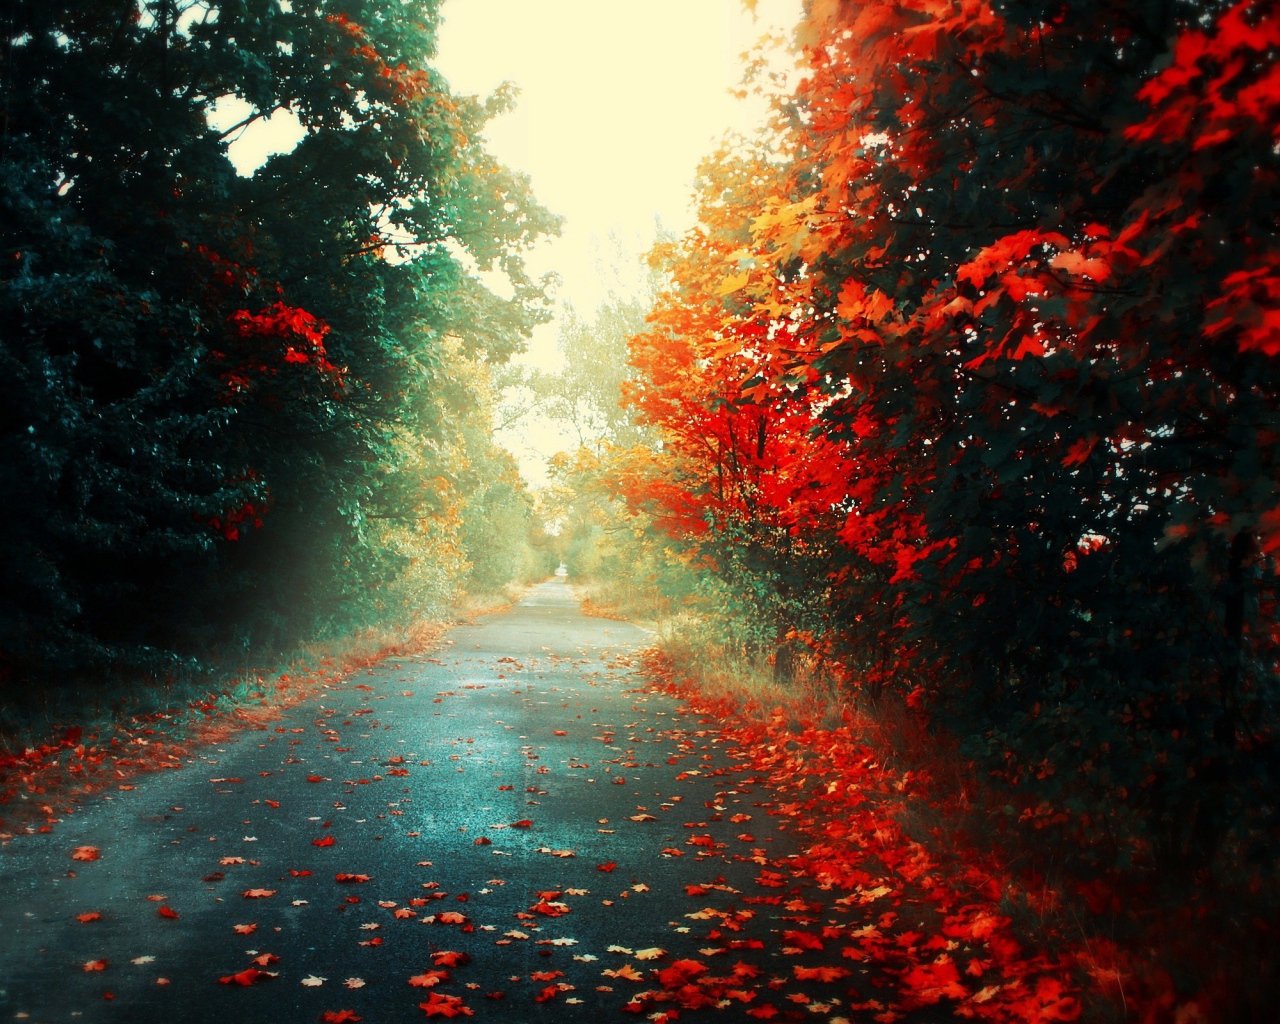 Fallen leaves on the road